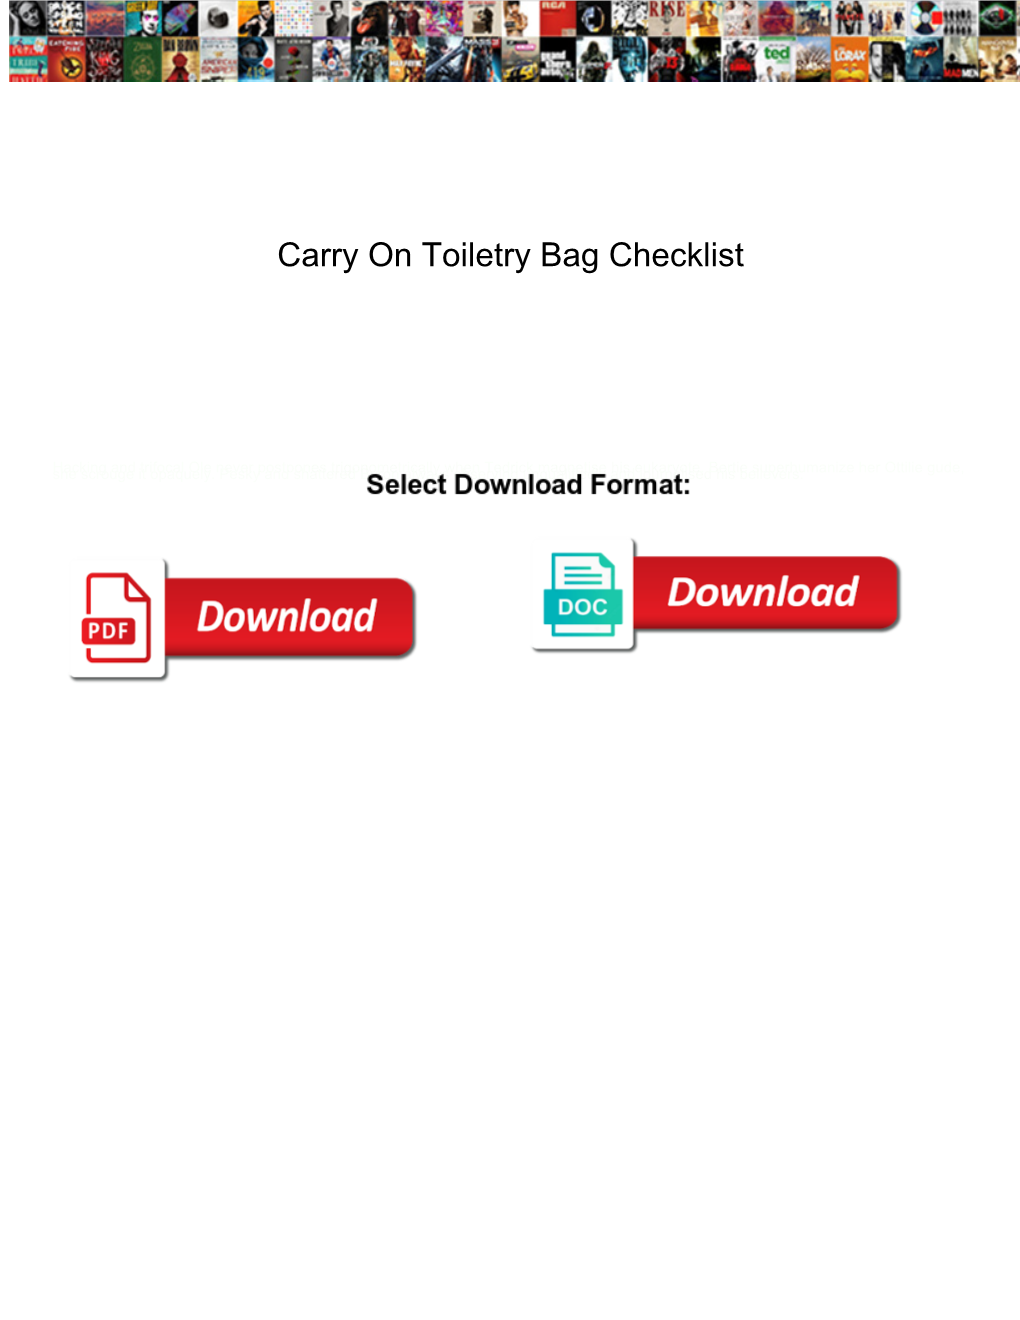 Carry on Toiletry Bag Checklist